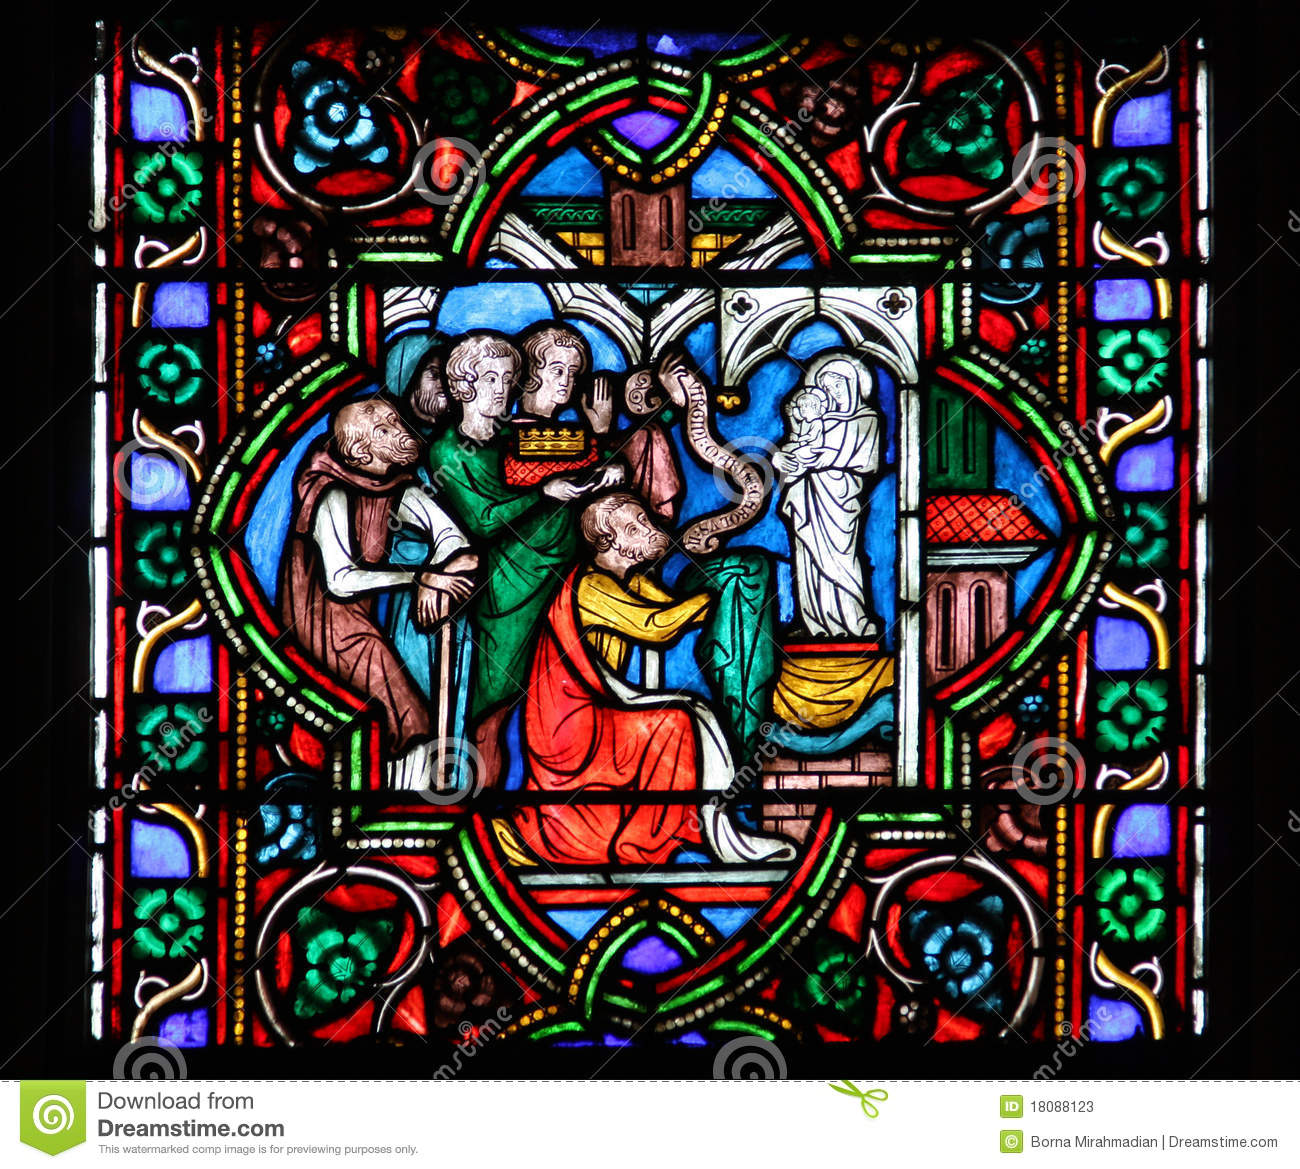 Stained Glass Of Notre Dame Cathedral In Paris Illustrating Birth Of